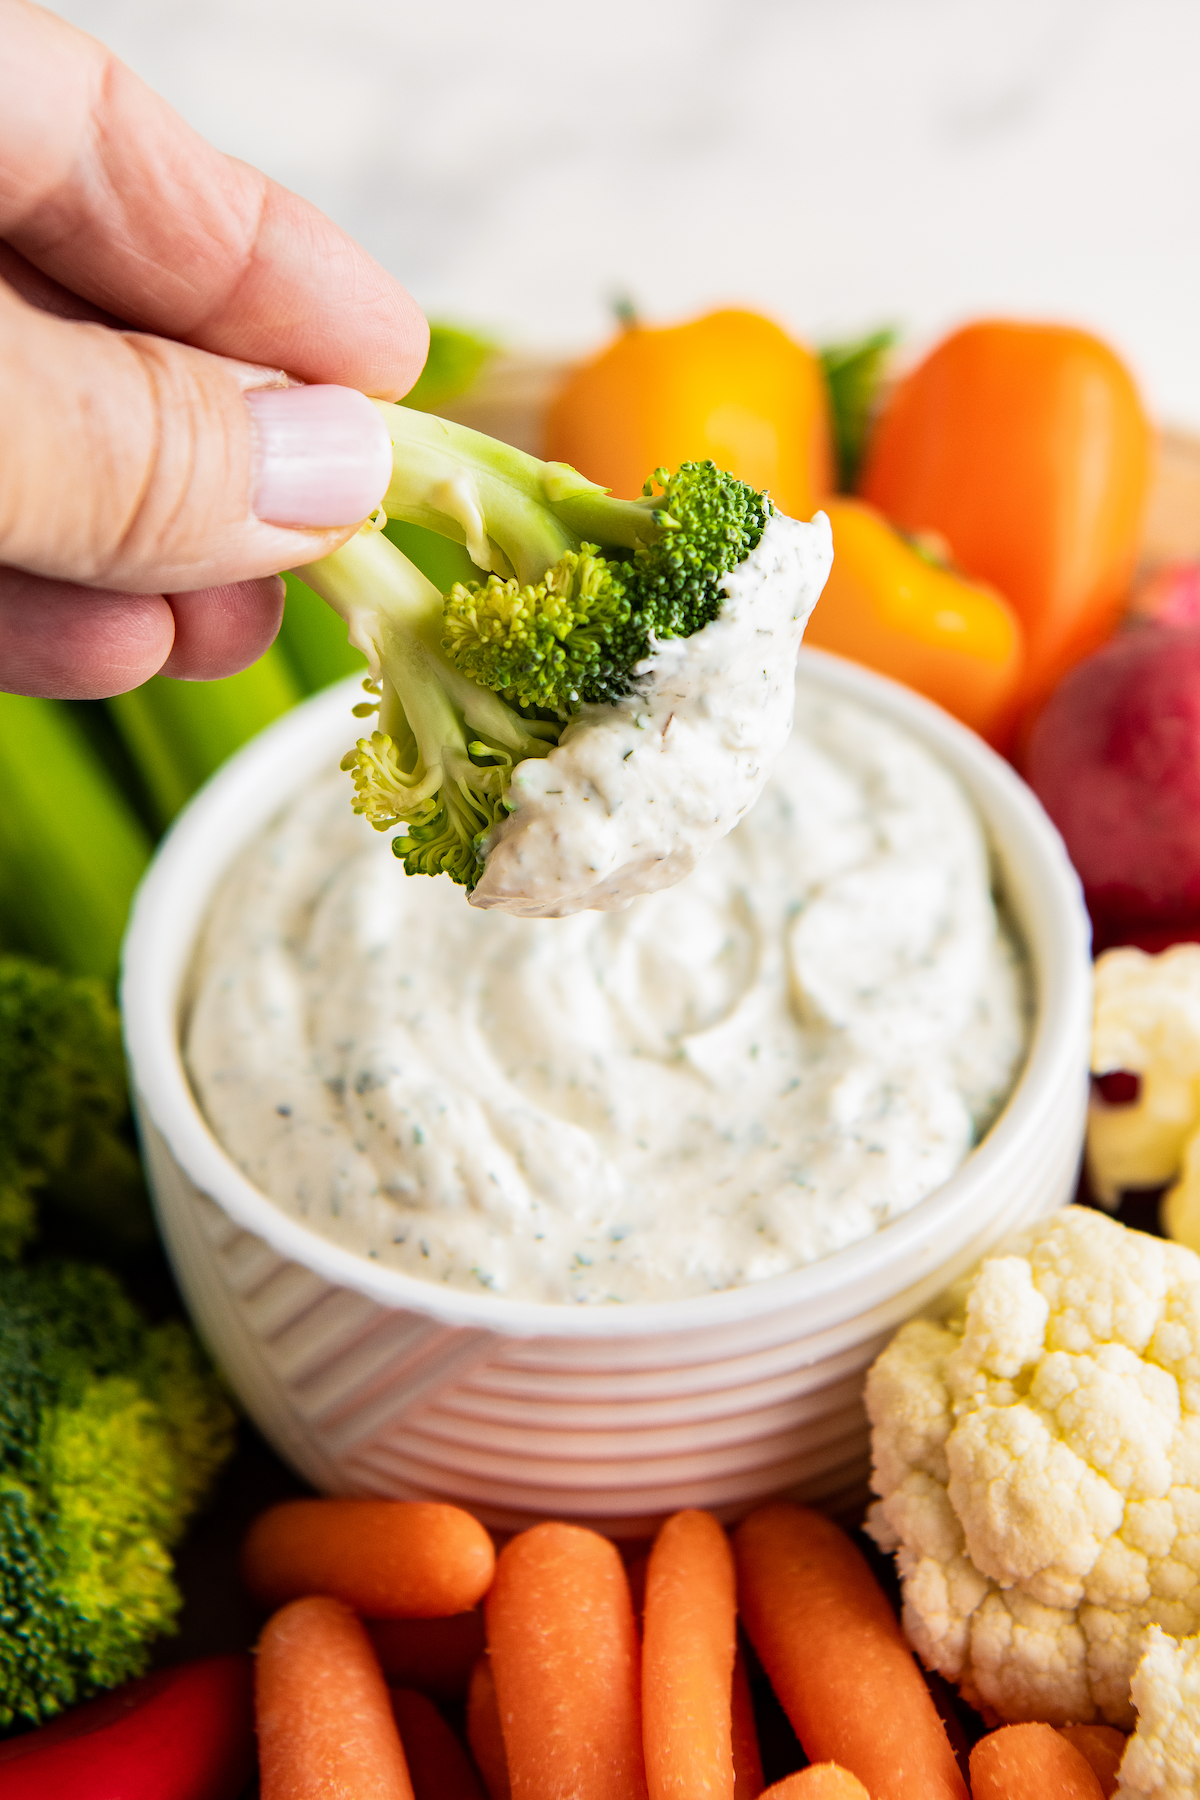 A hand dipping a piece of broccoli into a bowl of ranch, surrounded by carrots and peppers